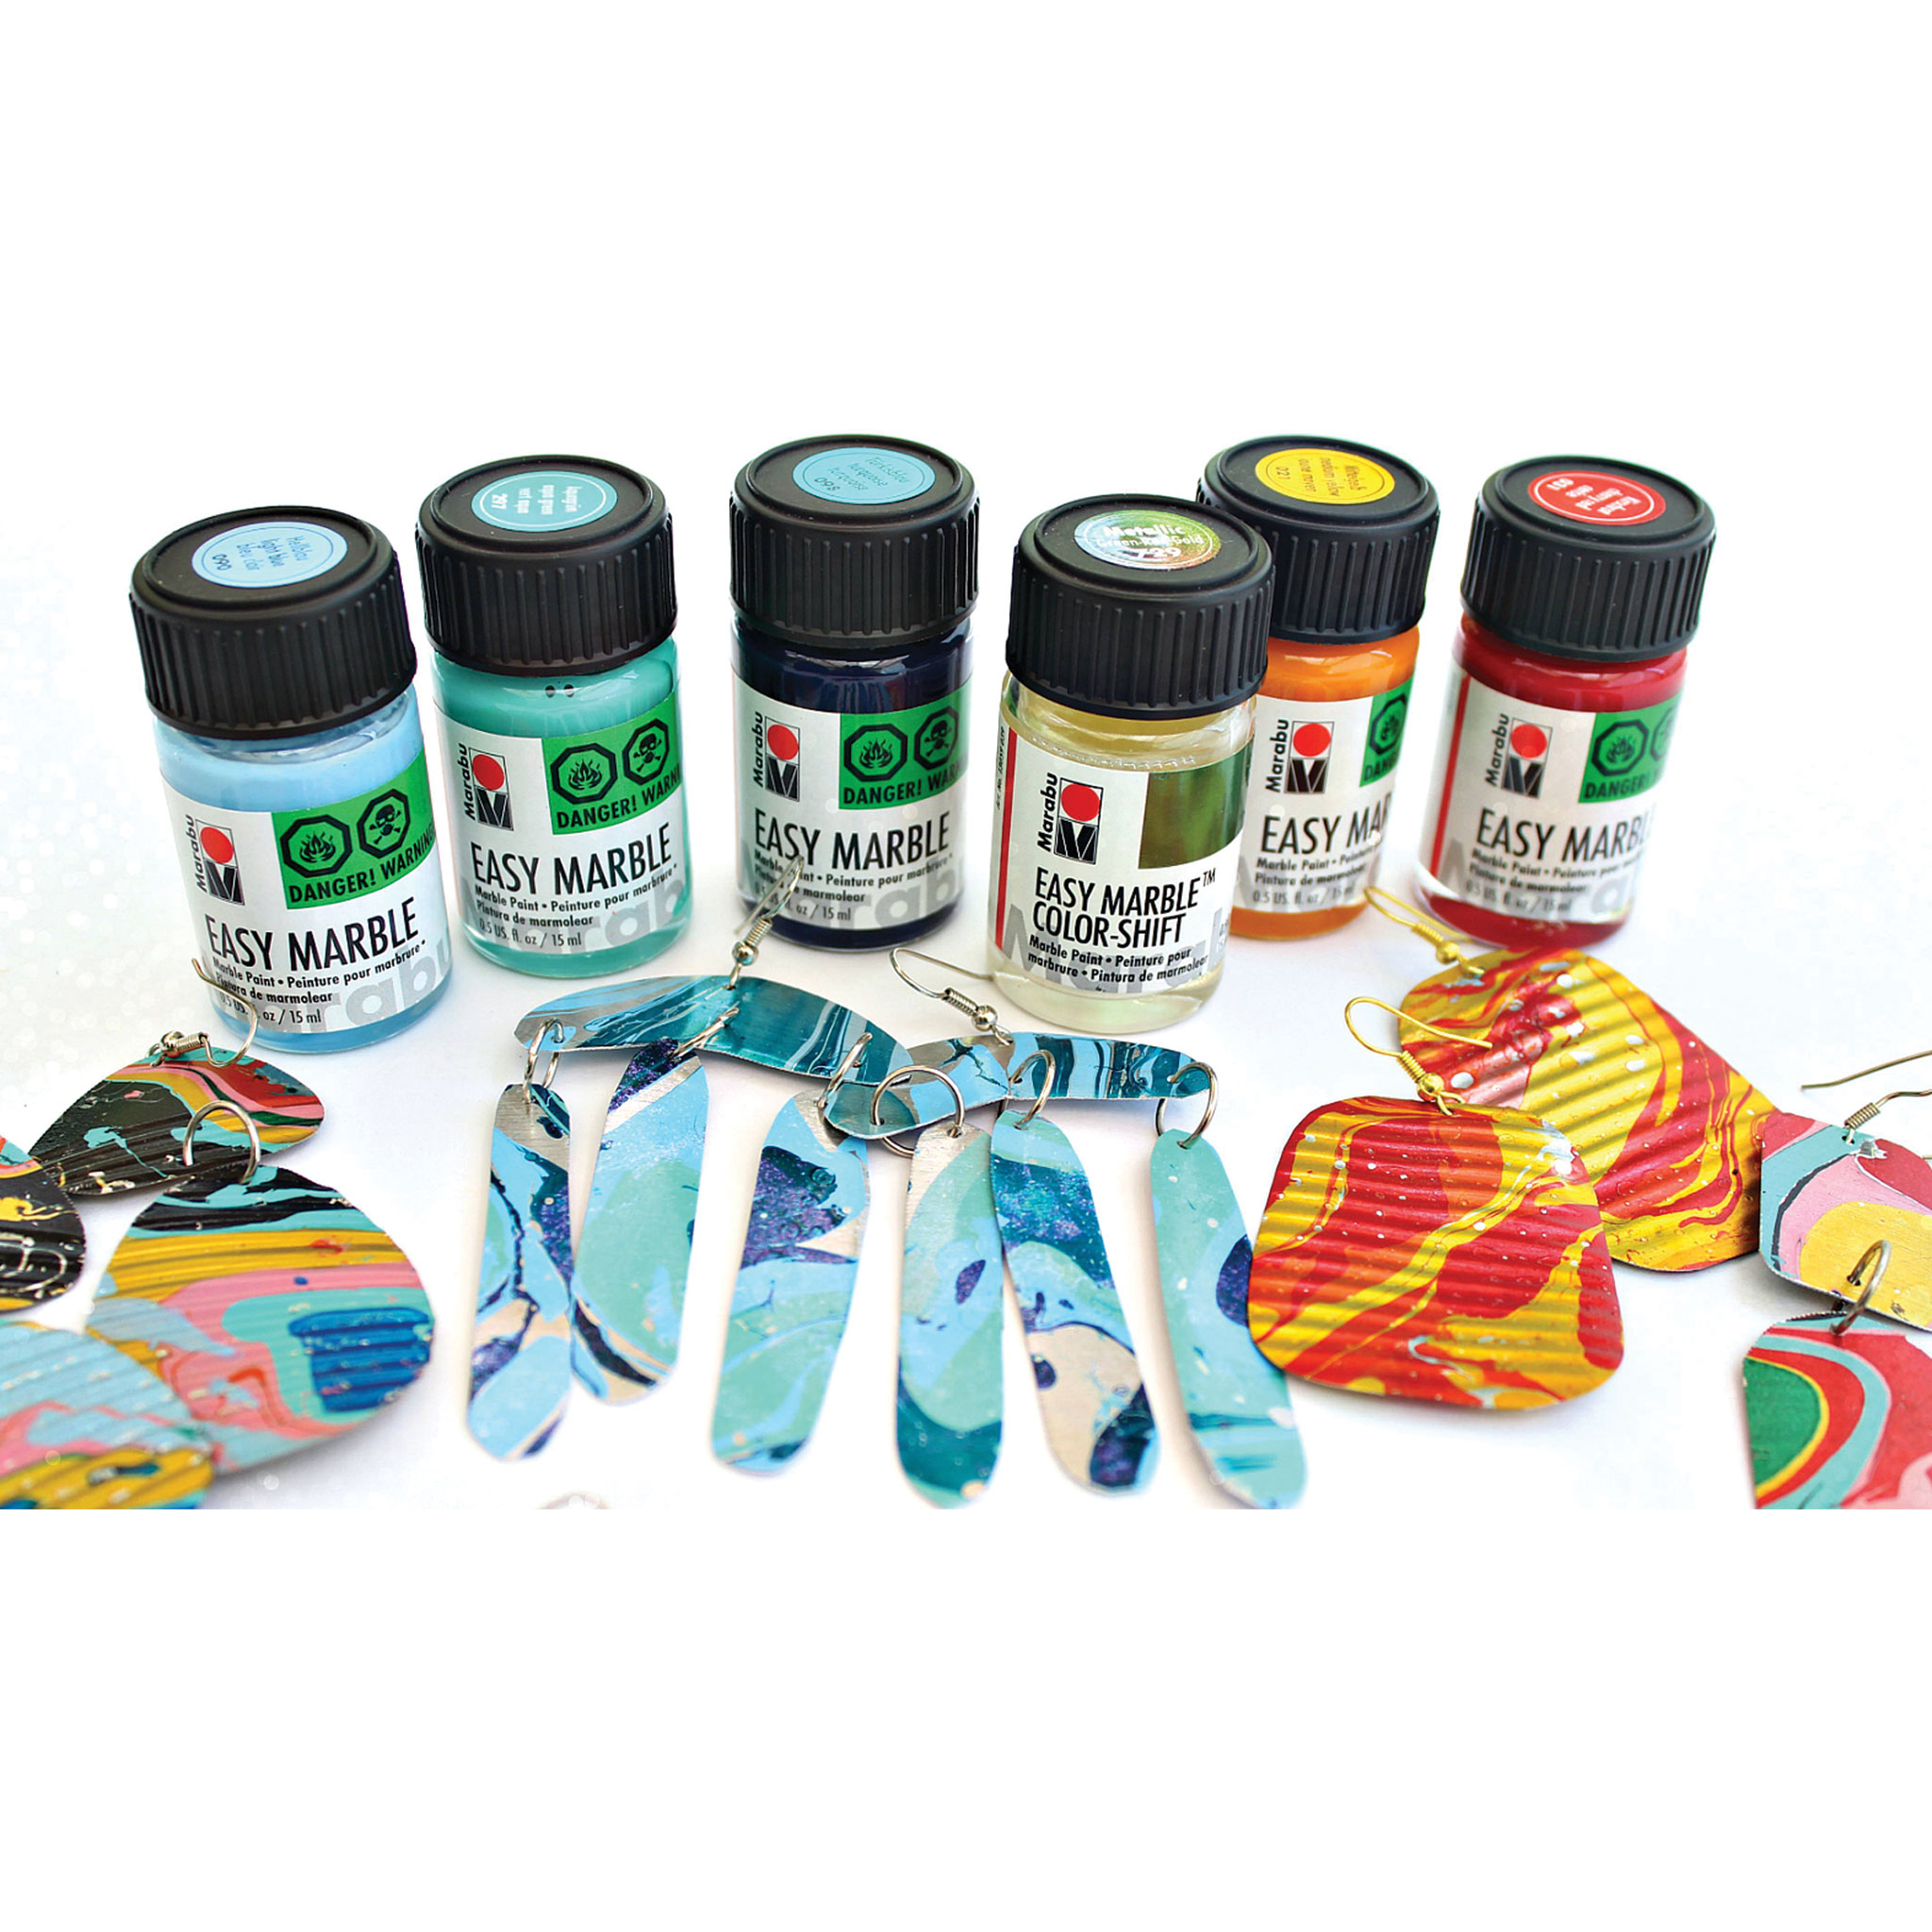 Marabu Easy Marble Paint Set - Primary Colors Starter Set - Marbling Paint  Kit for Kids and Adults - Hydro Dipping Paint for Tumblers, Ceramic, Paper